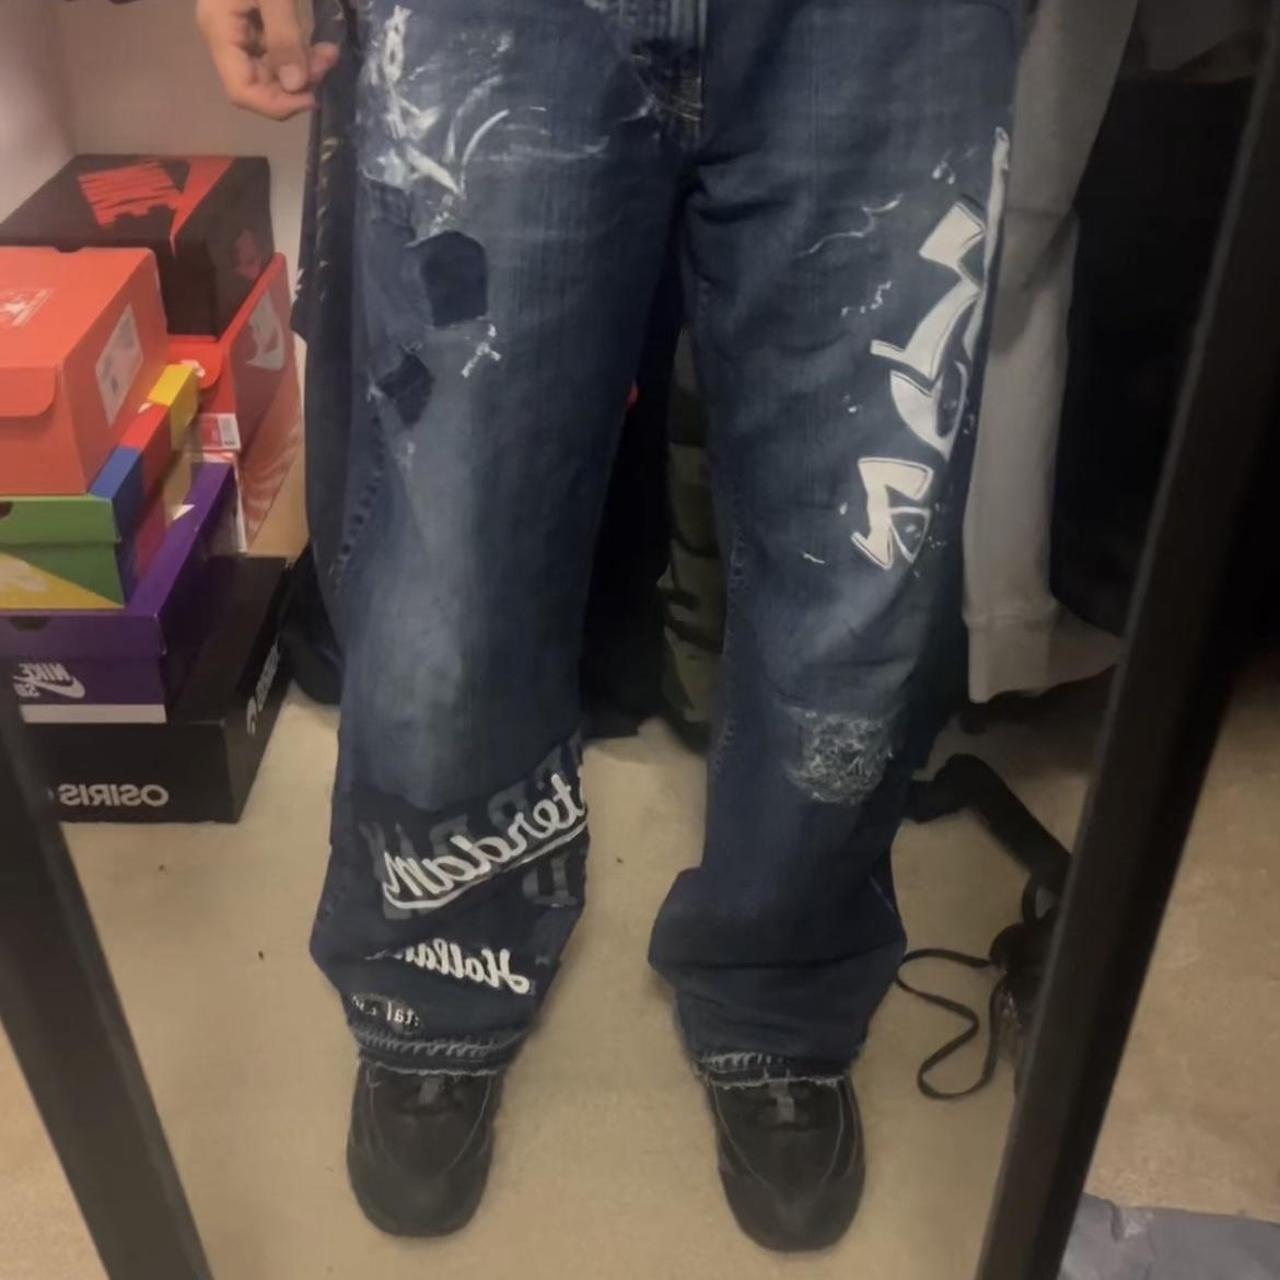 1/1 patched distressed hand painted on jeans nice... - Depop